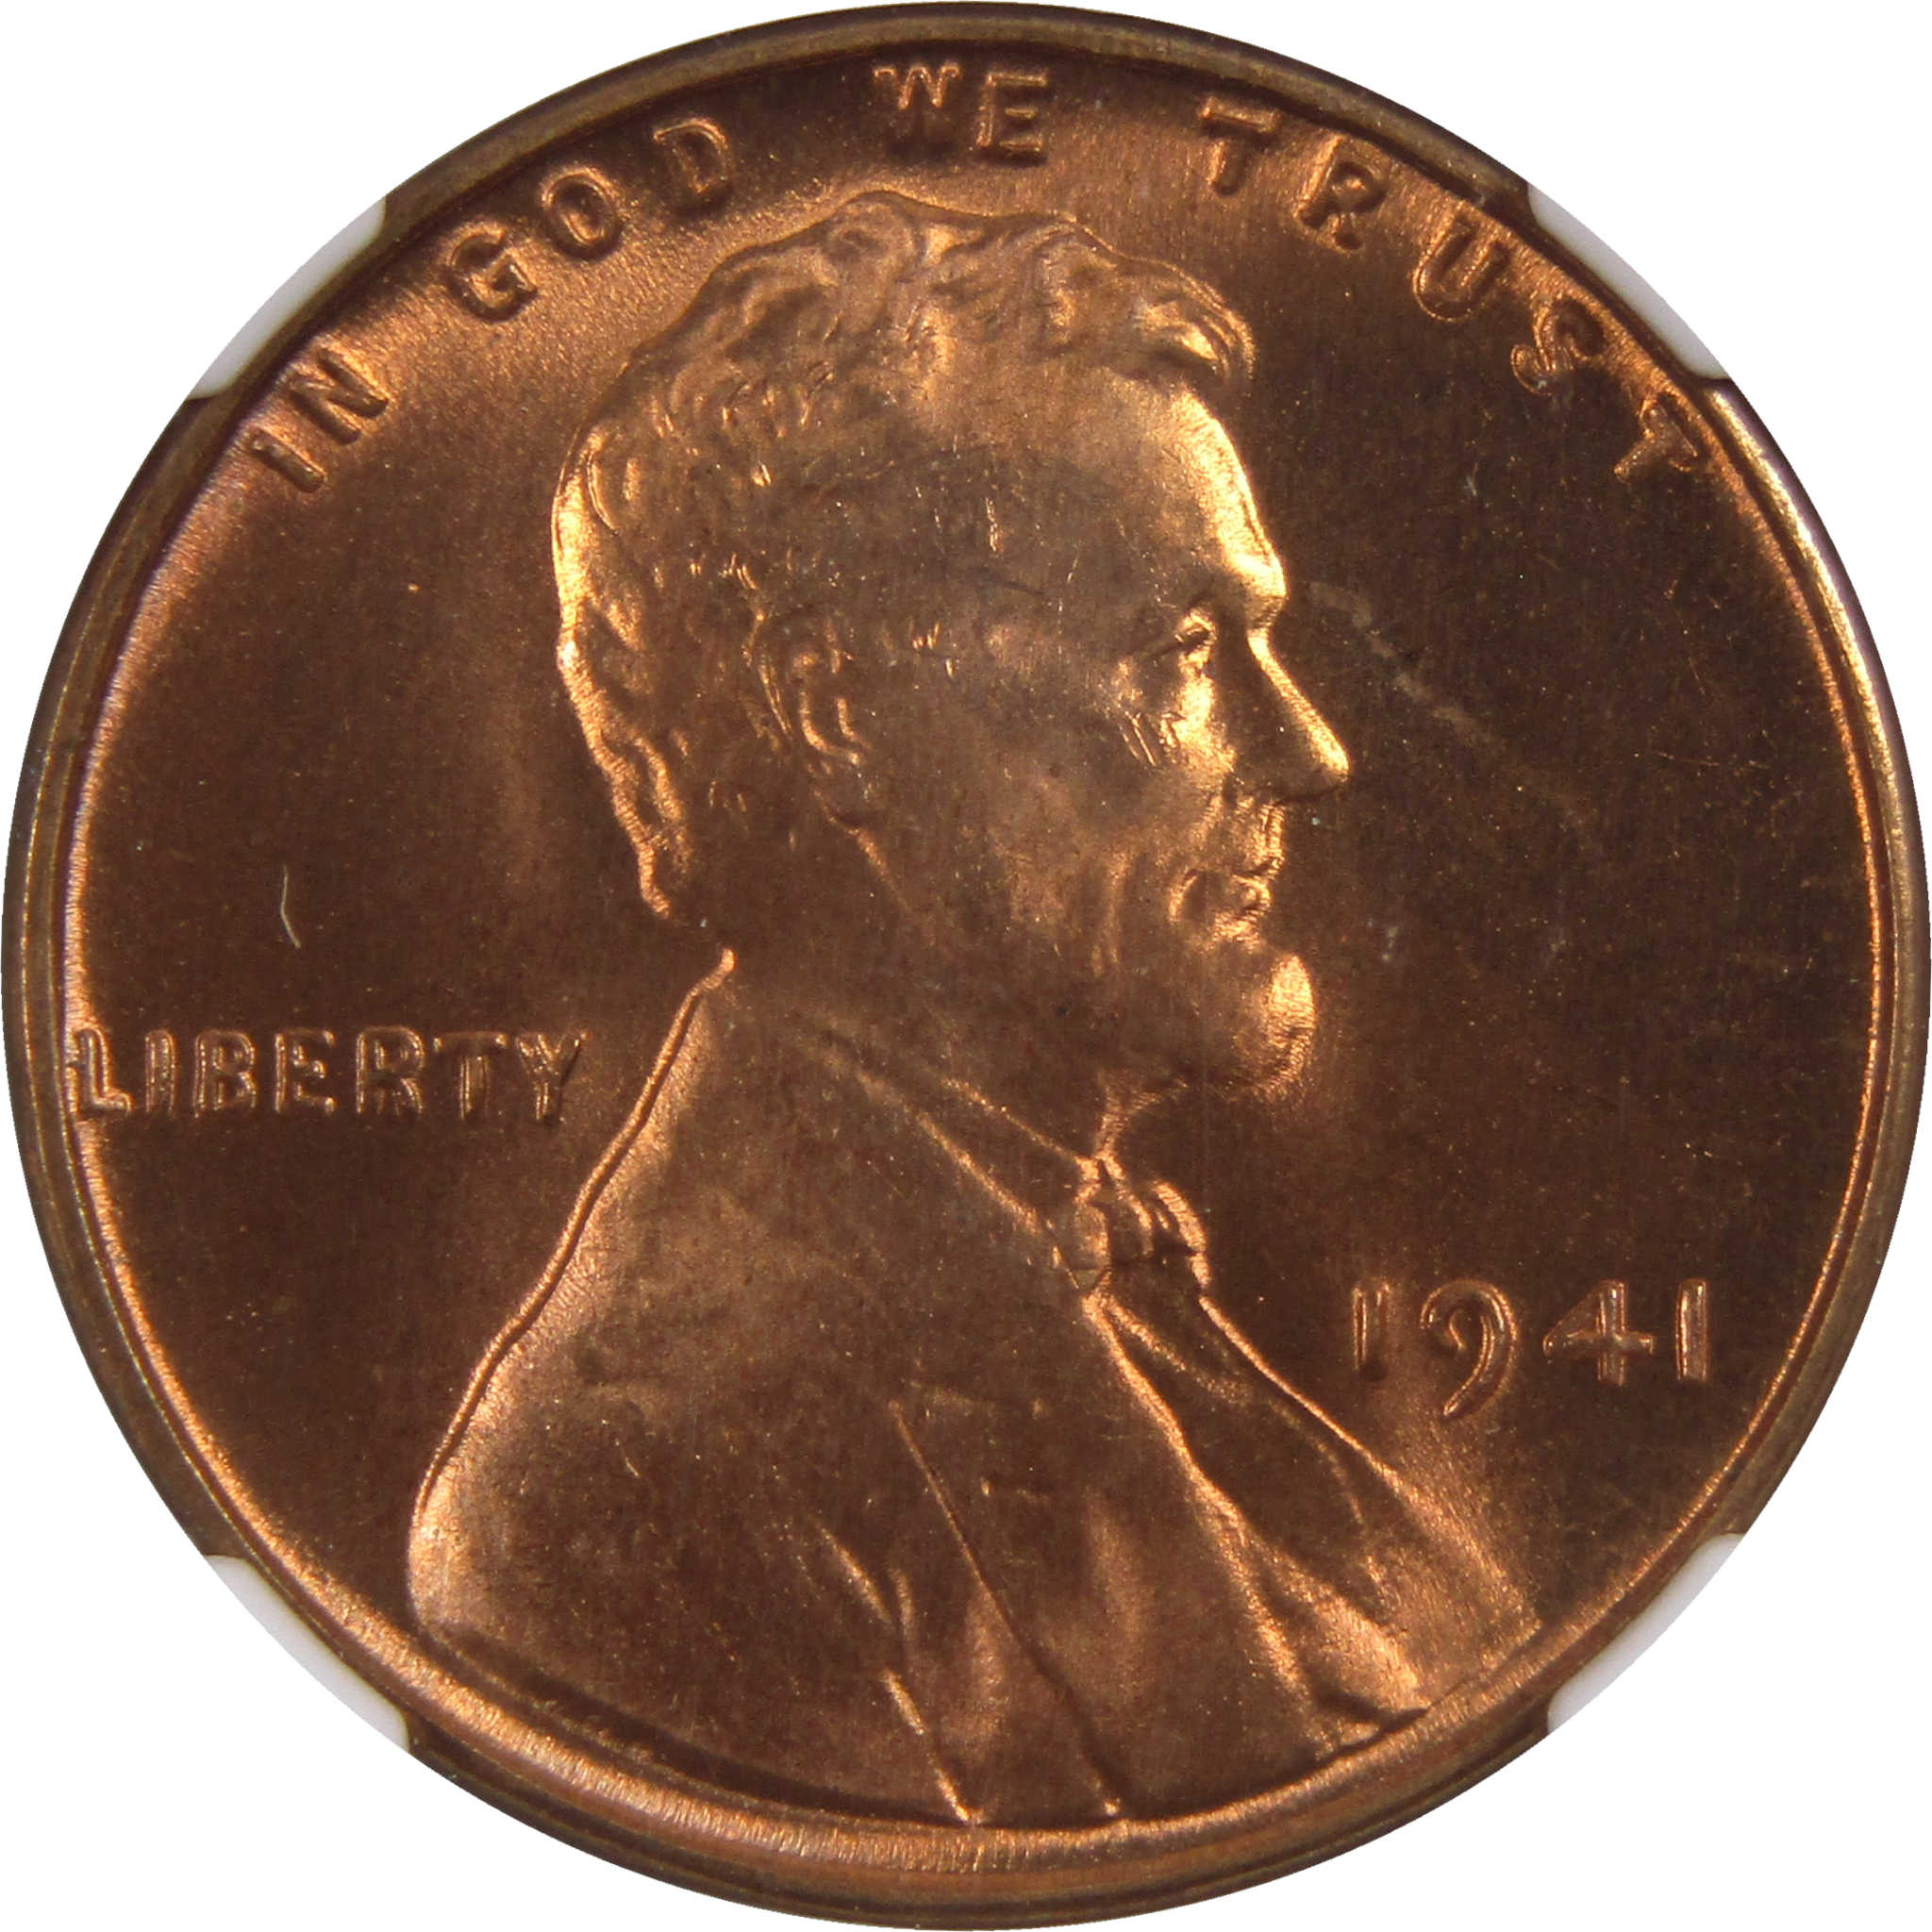 1941 Lincoln Wheat Cent MS 67 RD NGC Penny Uncirculated Coin SKU:I3173